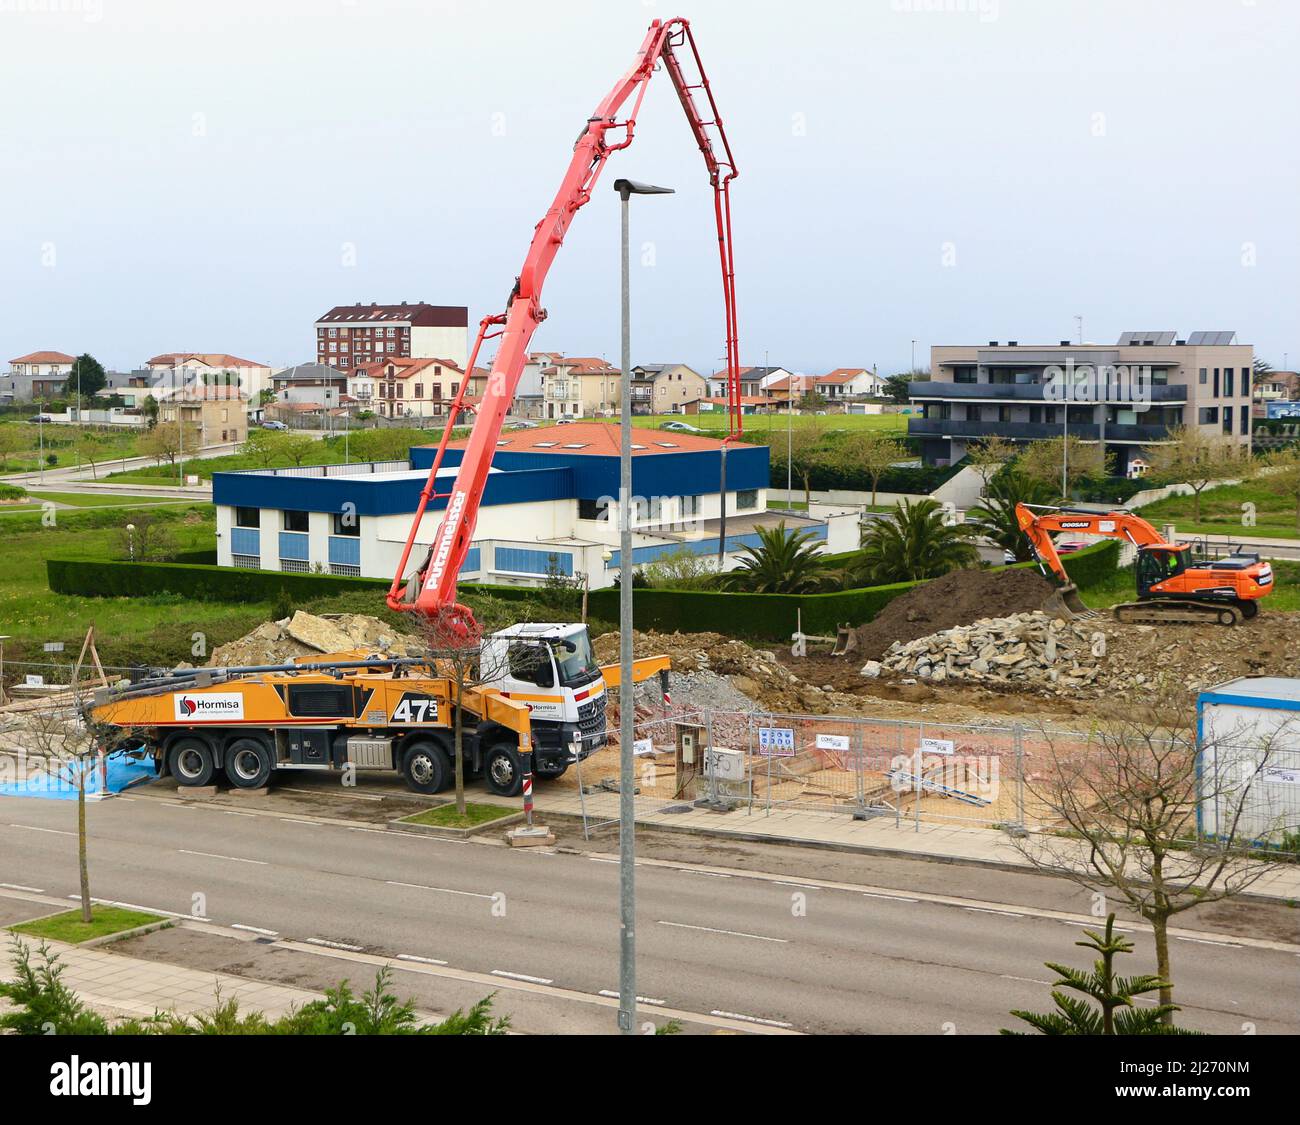 Mercedes Benz truck mounted 47.5 Putzmeister Concrete Pump being used at a  construction site Santander Spain Stock Photo - Alamy